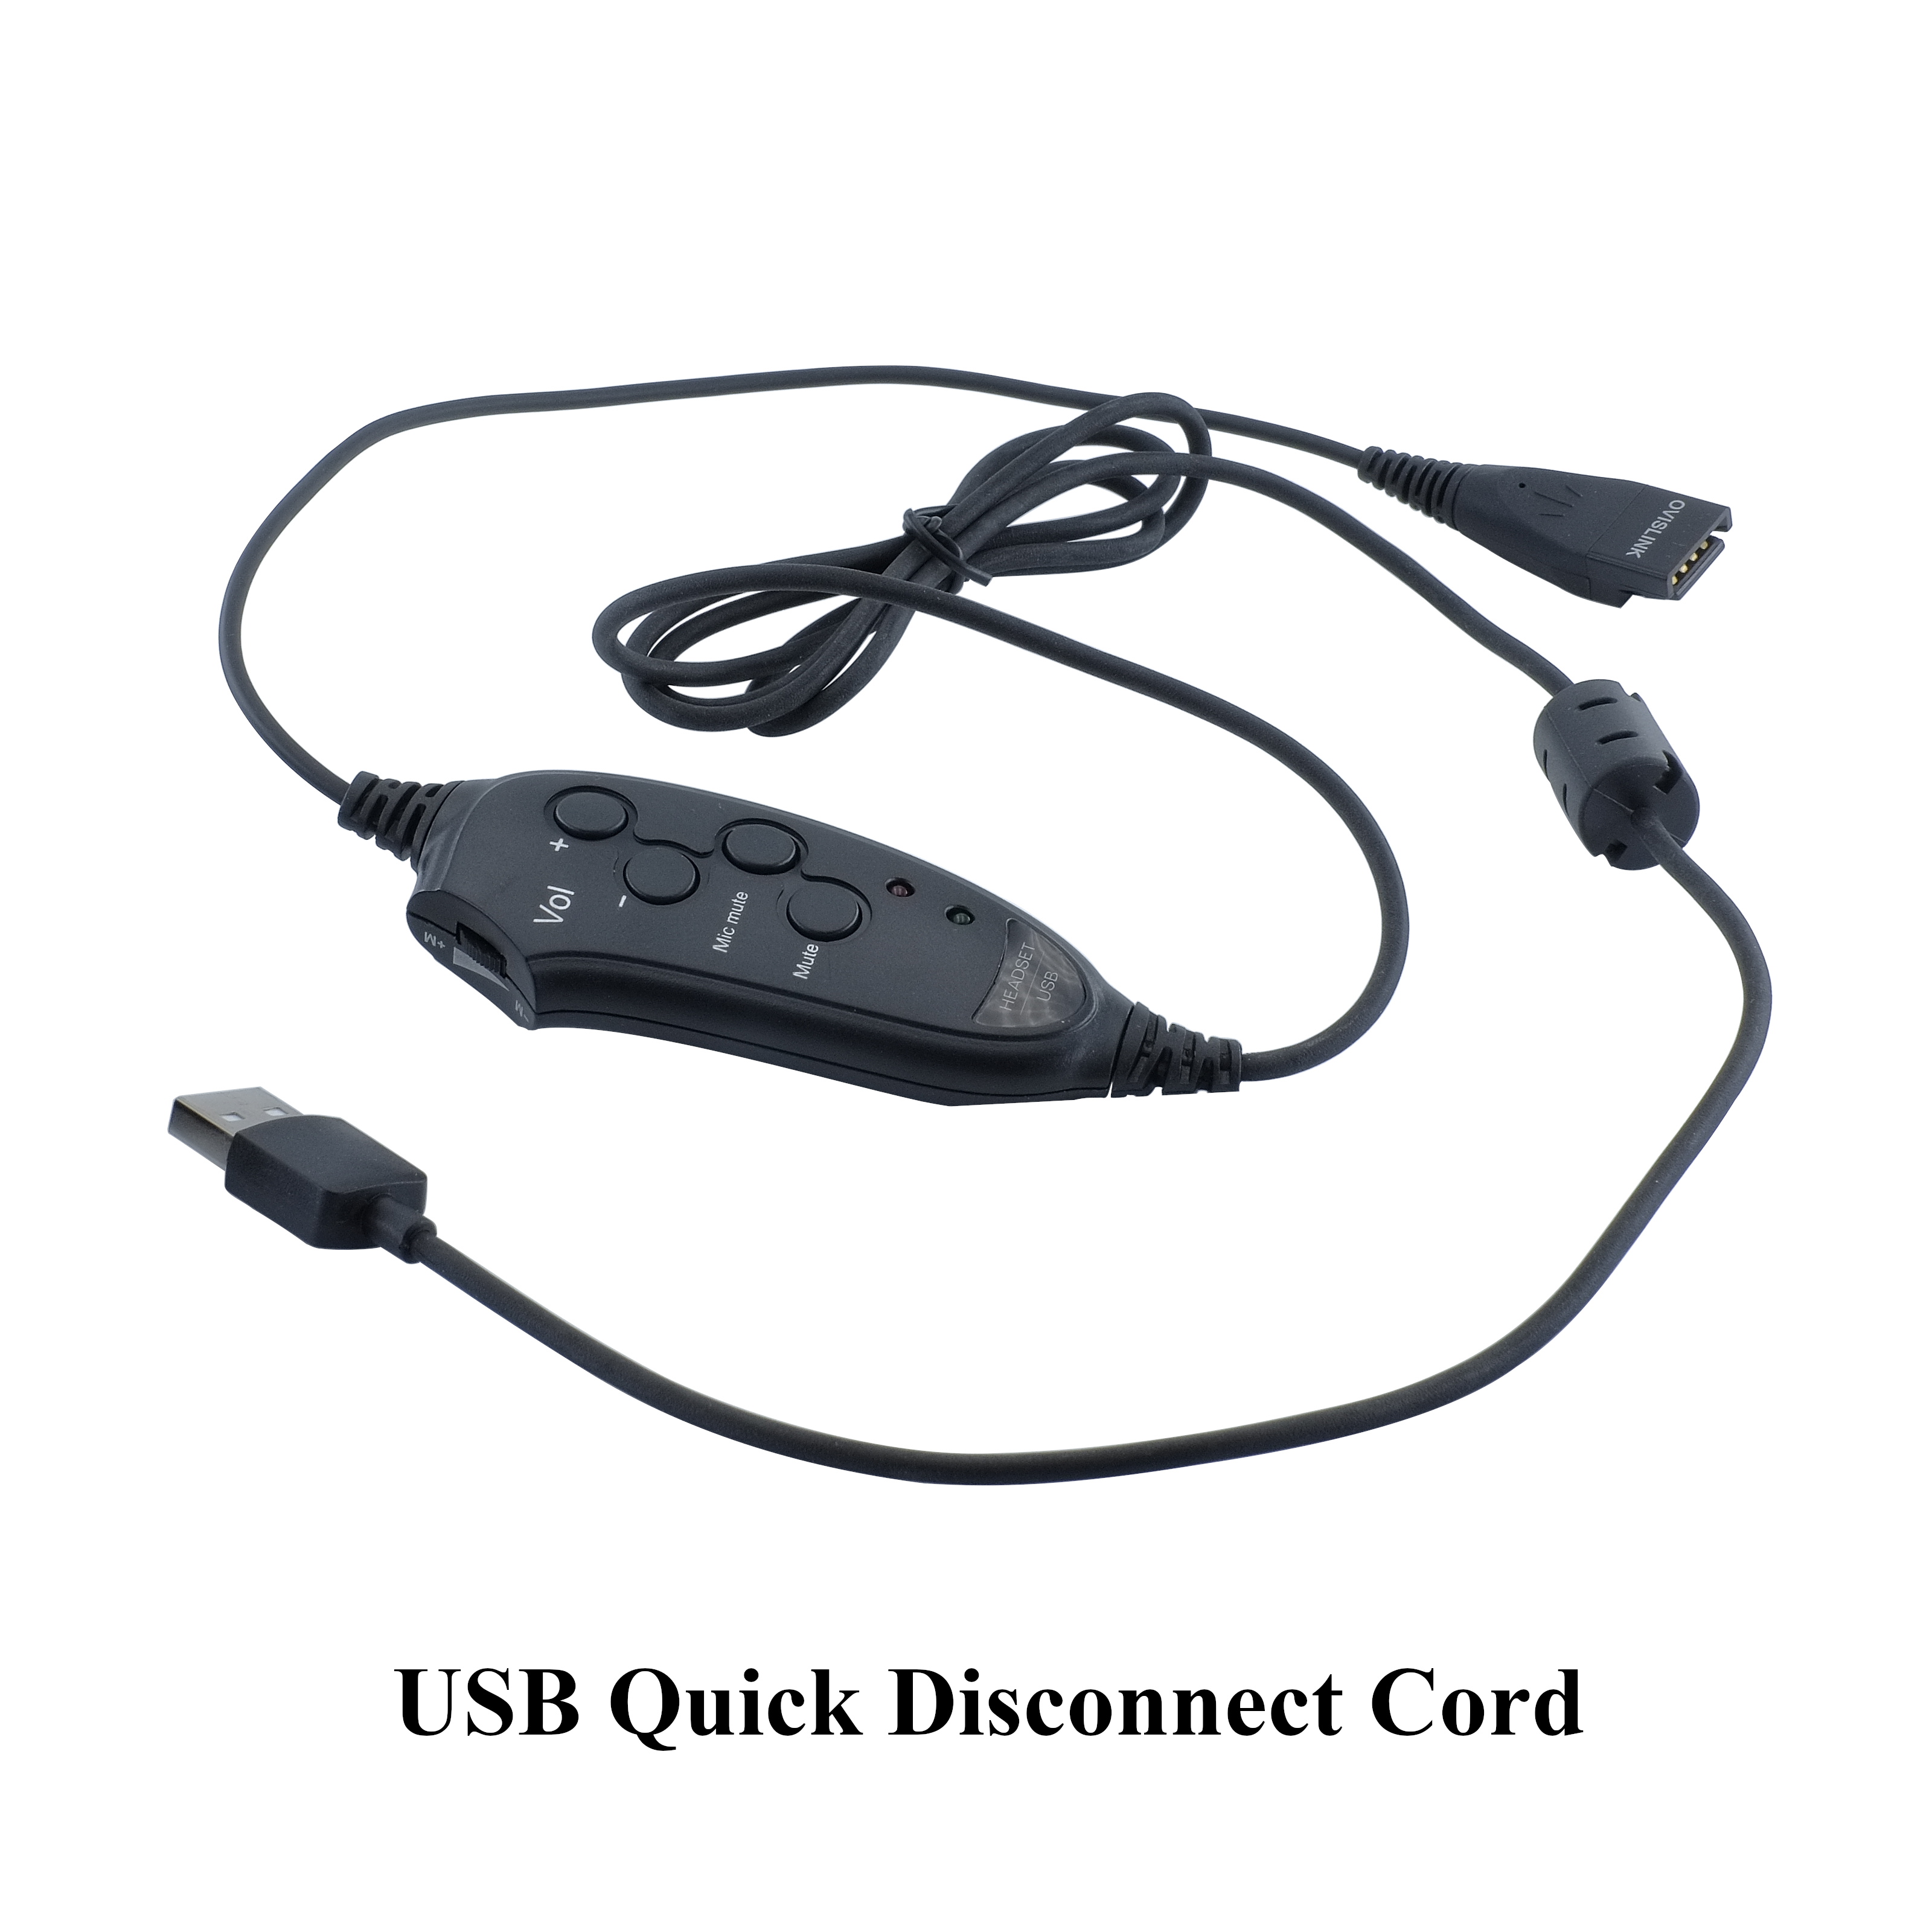 OvisLink Headset USB Quick Disconnect Cord Thumbnail